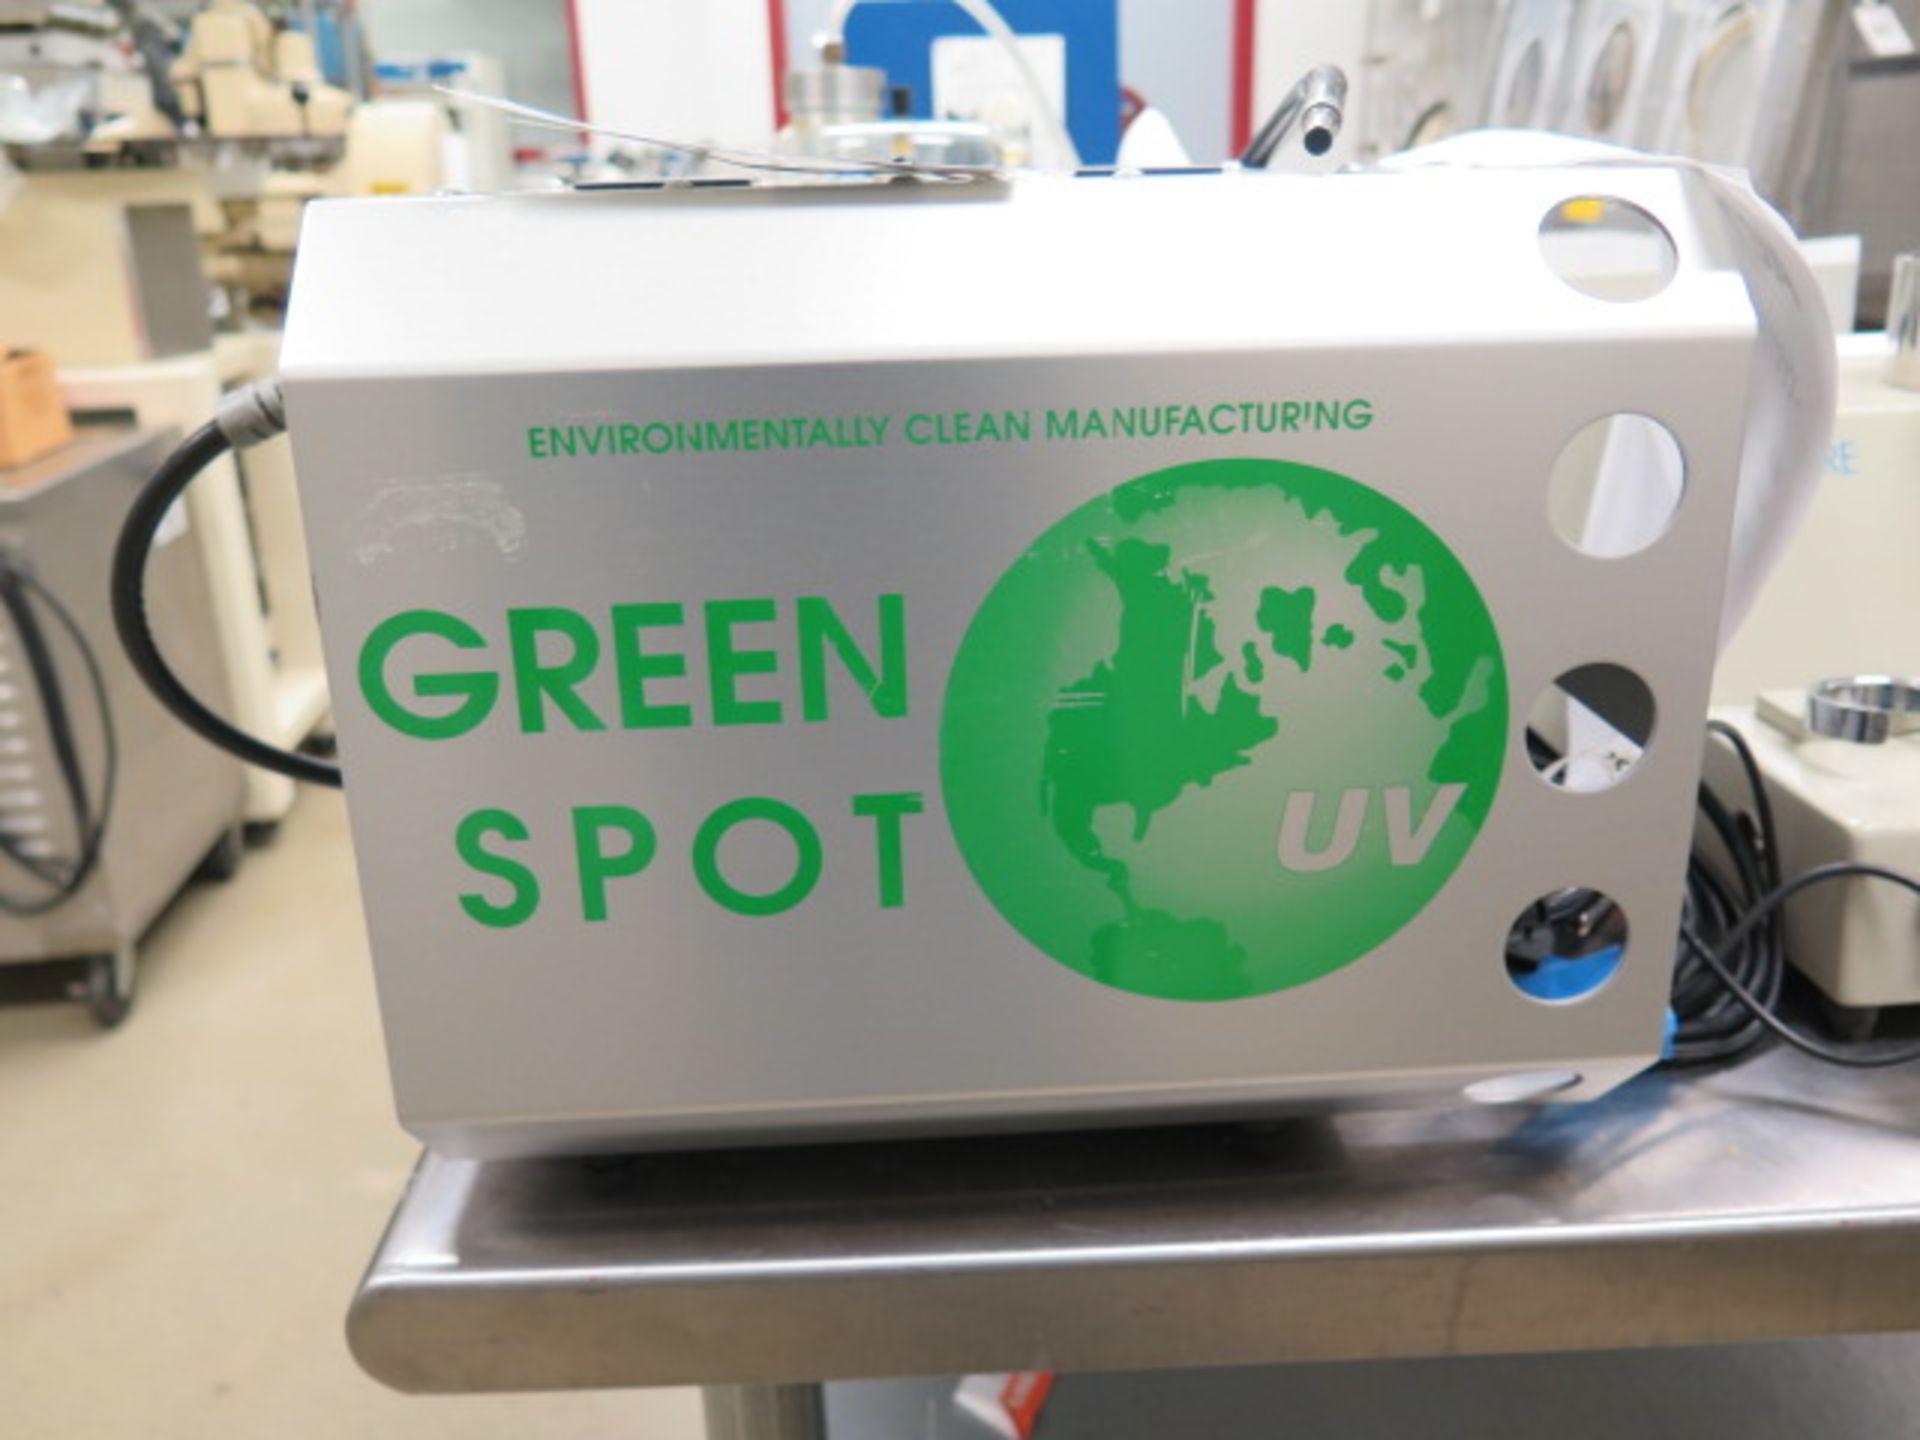 UV Source “Green Spot” mdl. 103 UV Spot Curing System (SOLD AS-IS - NO WARRANTY) - Image 5 of 10